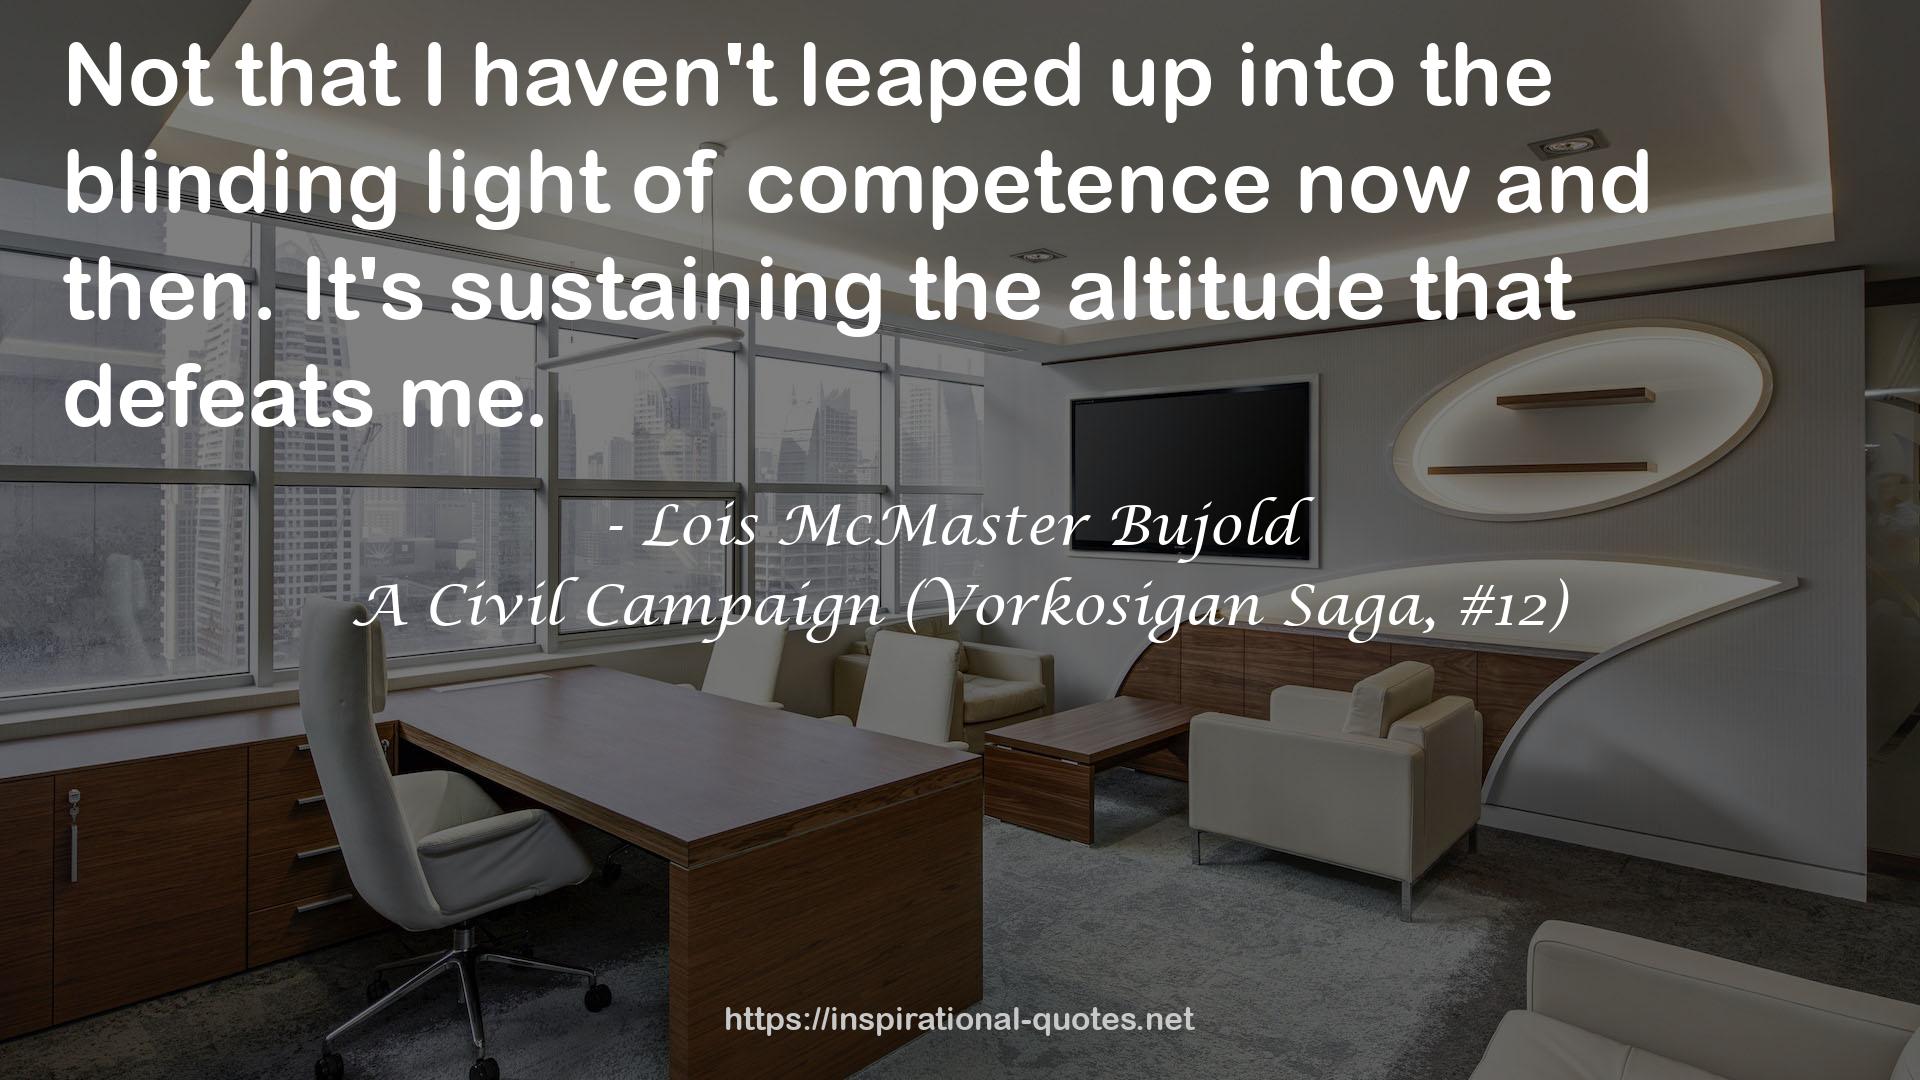 Lois McMaster Bujold QUOTES